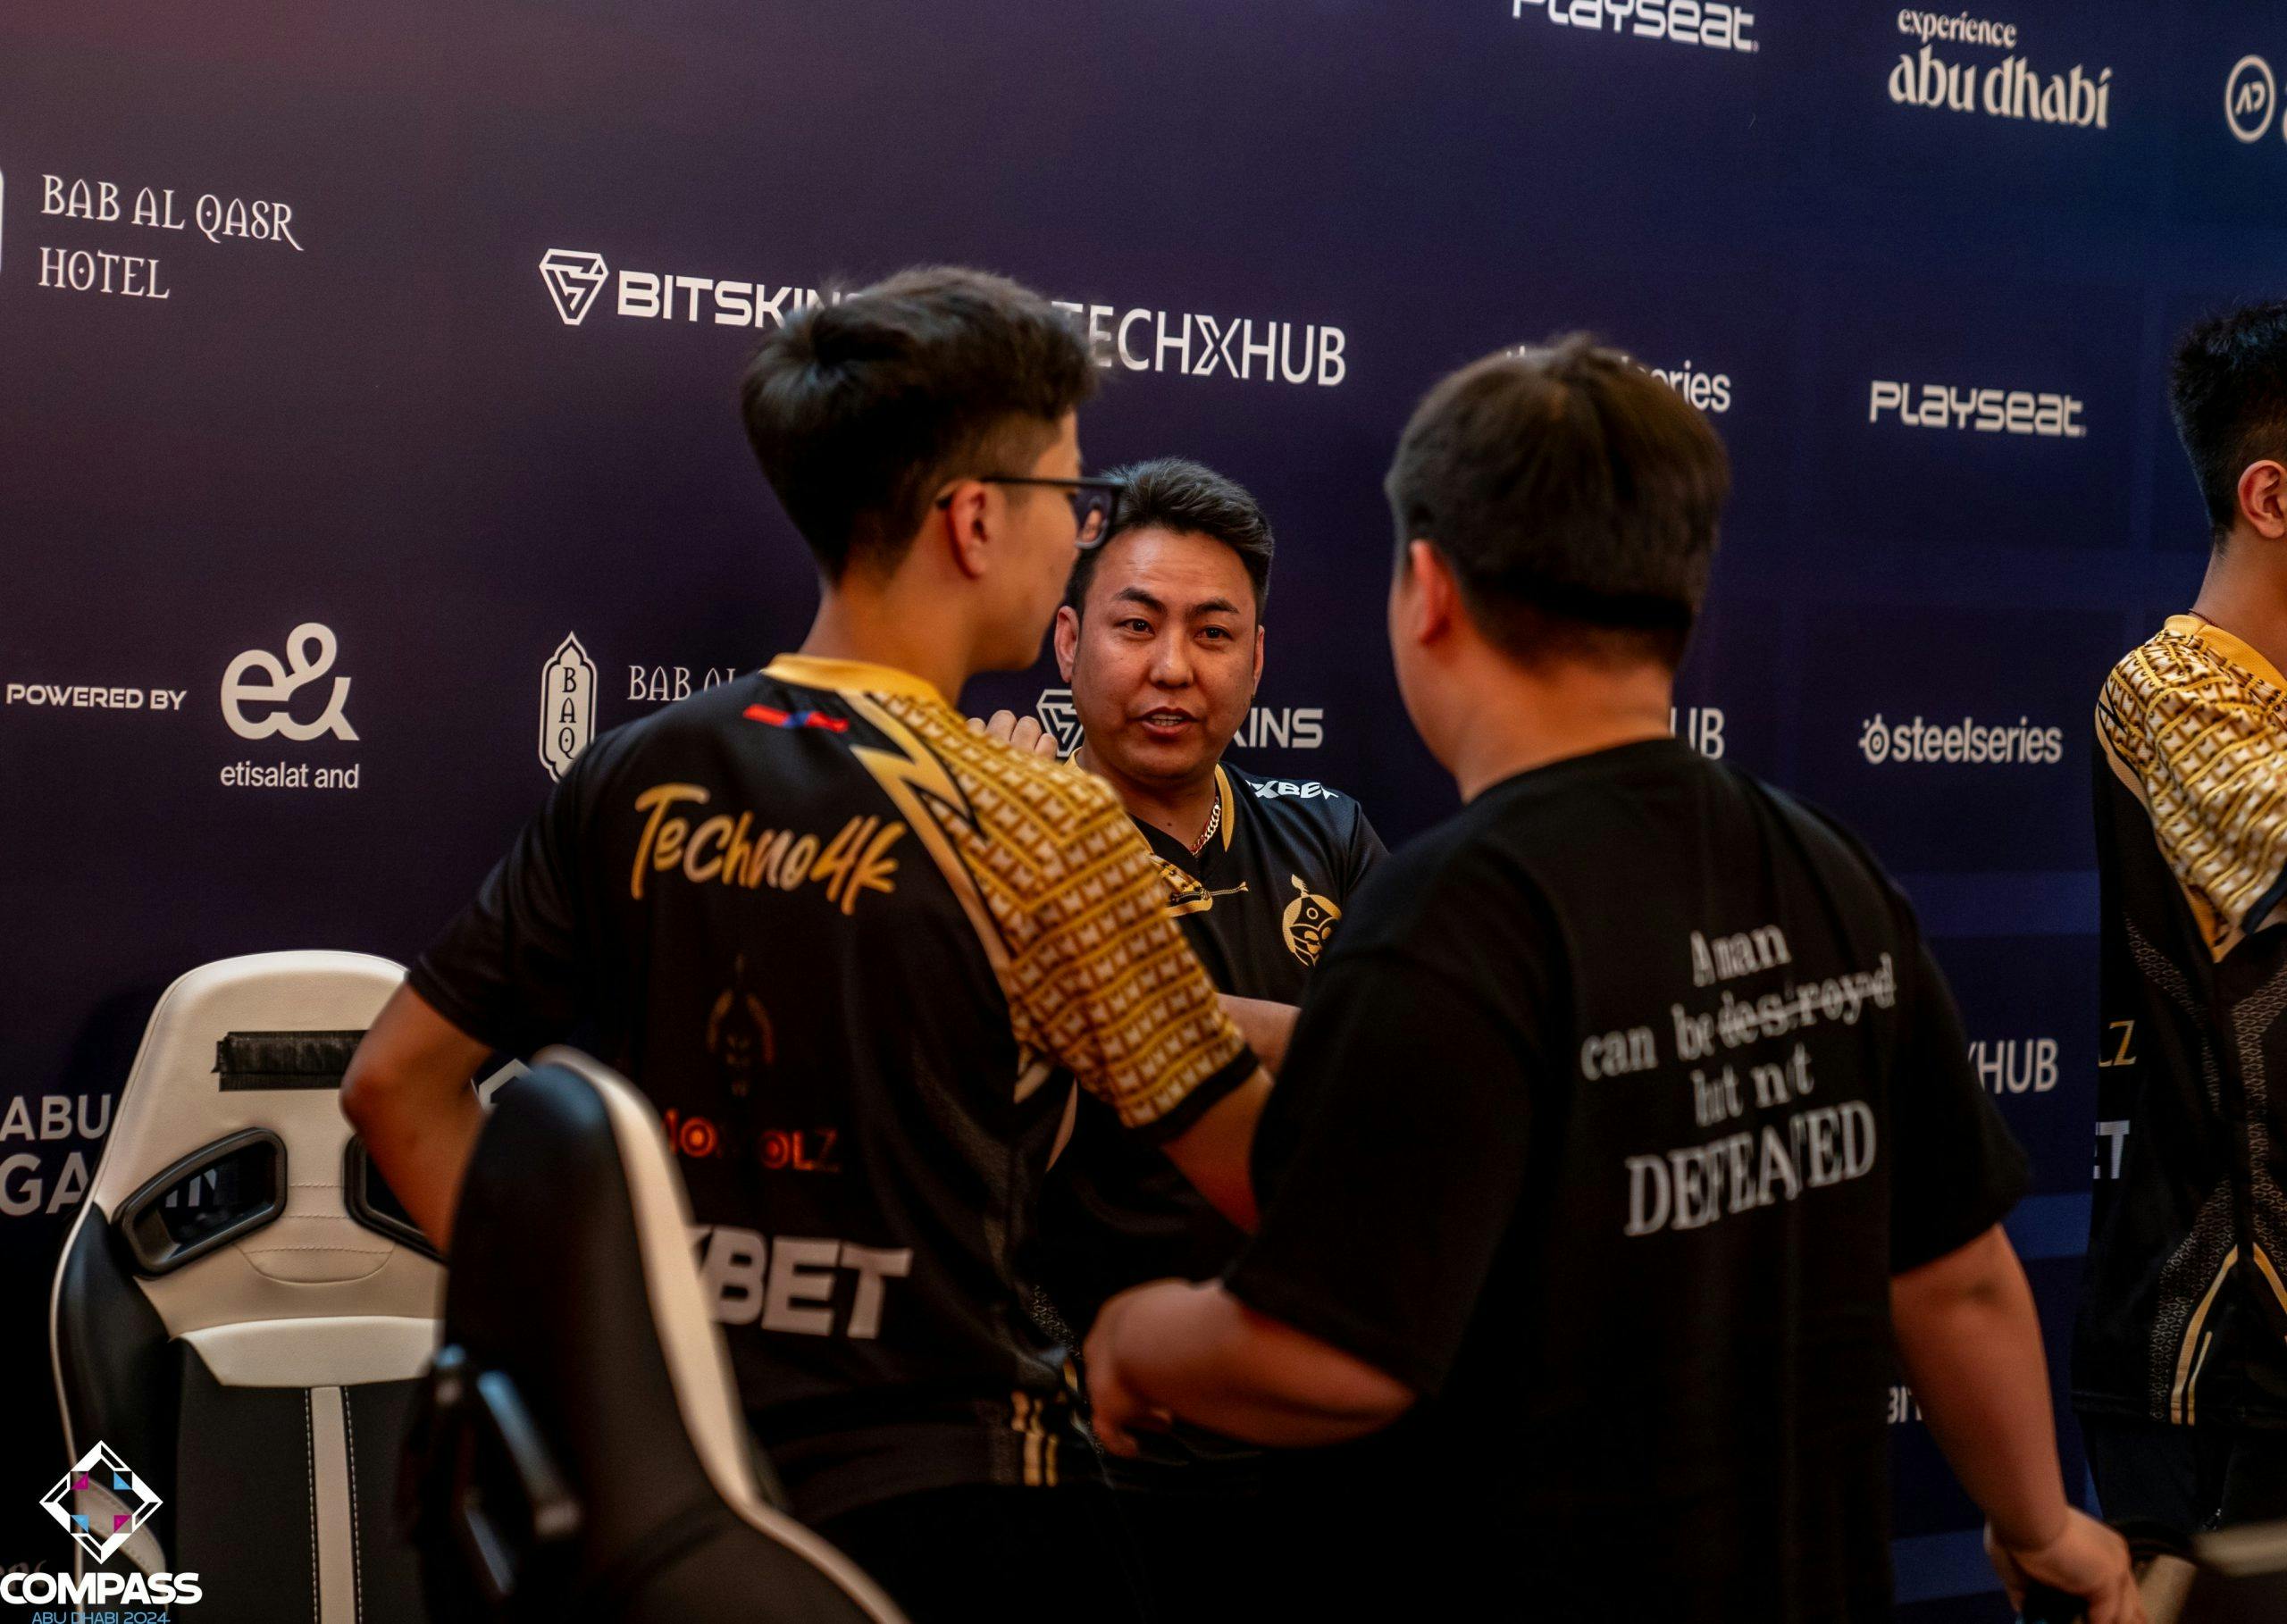 The MongolZ lift Asia's first S-Tier trophy in 10 years